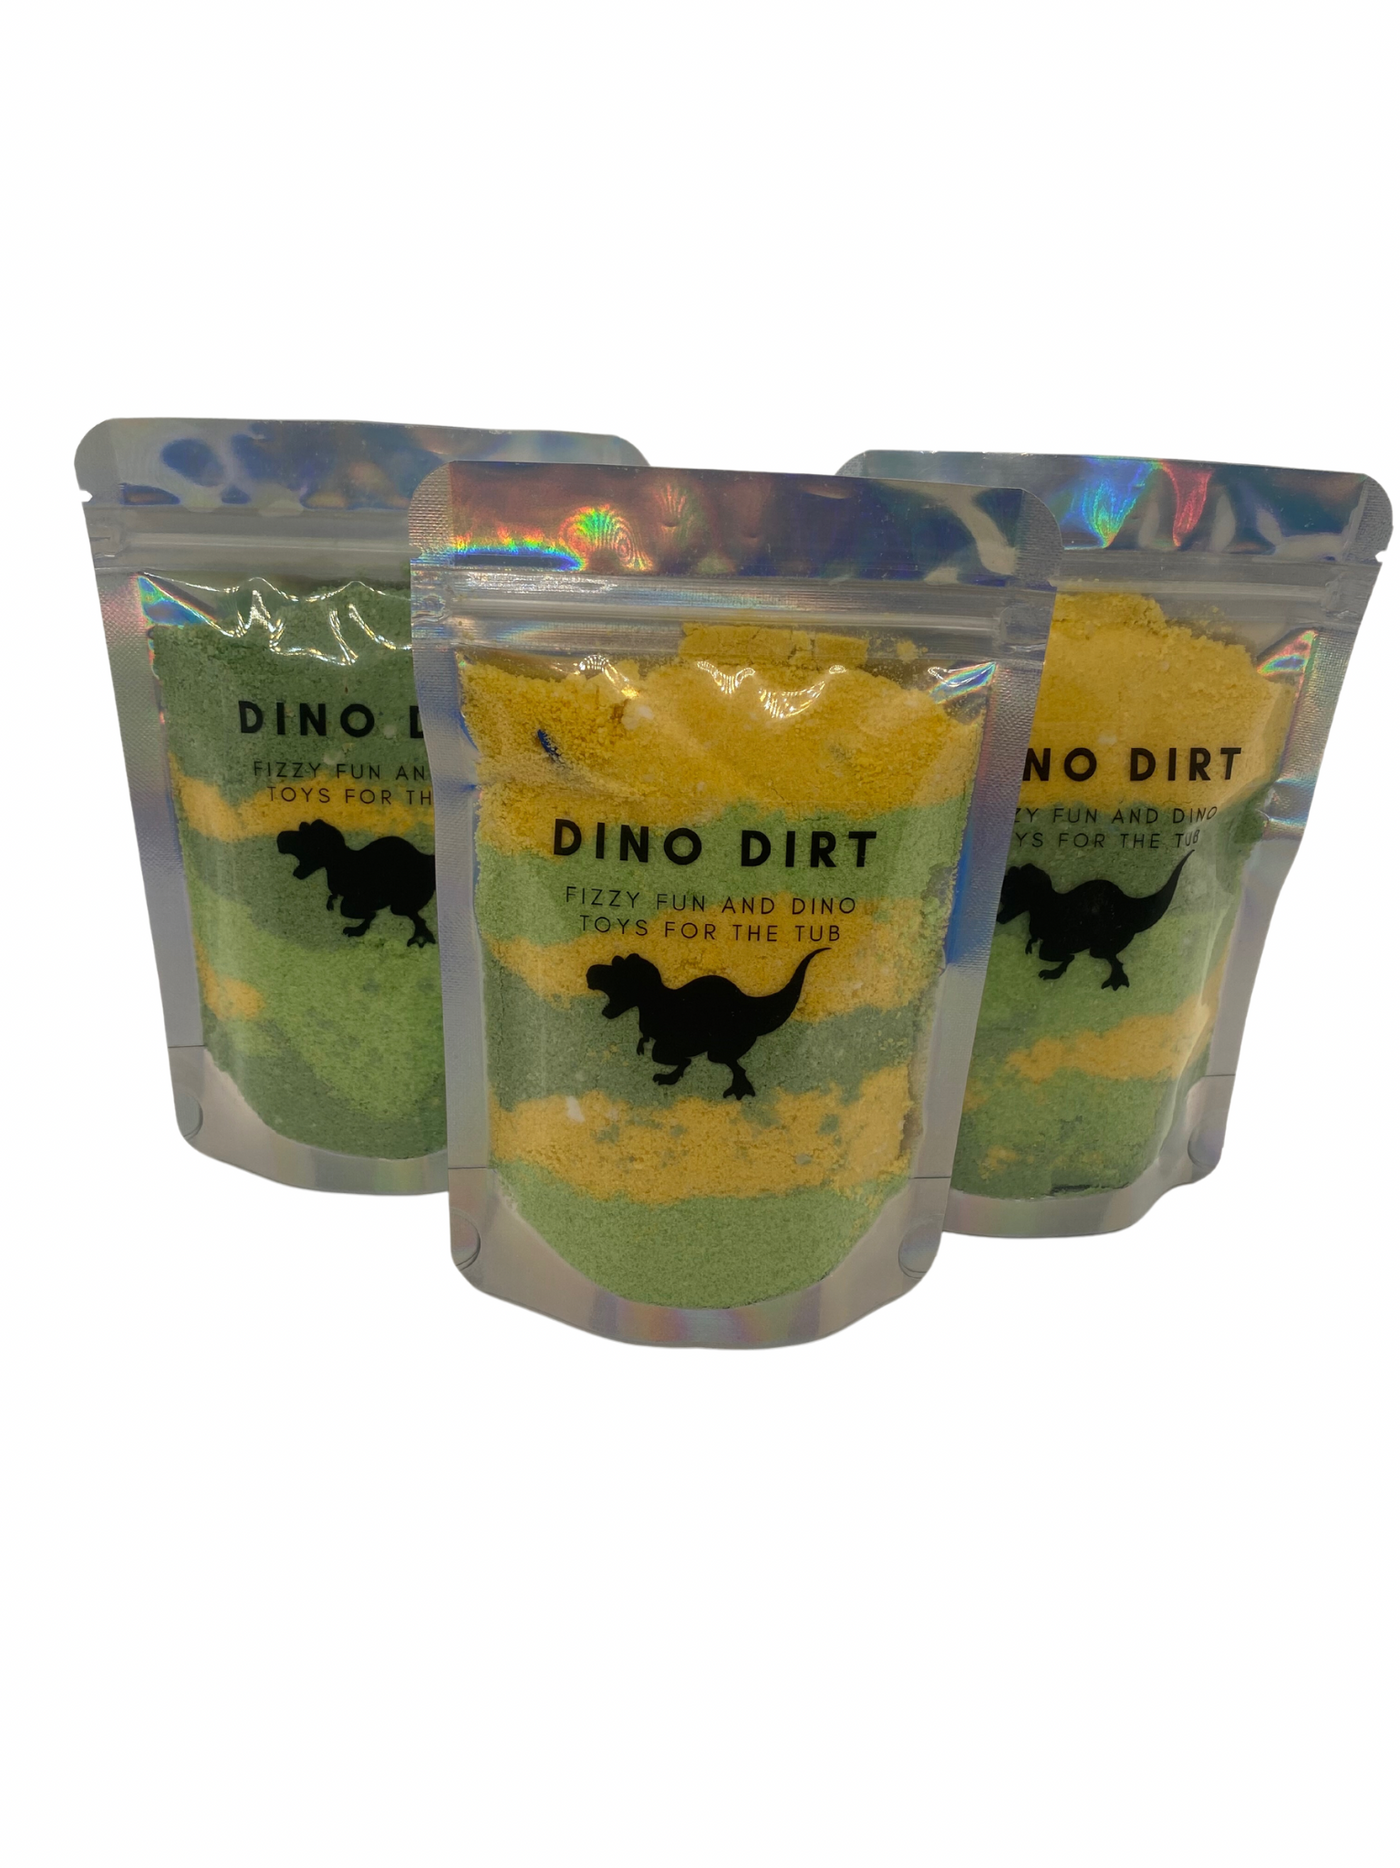 Dino Dirt | Bath Dust | Prizes | Buttermilk Soak | Bath Fizzy | Natural Oils & Butters | Self Care Gift | Gift for Her | Milk Bath | Spa Gift | Gift for Him